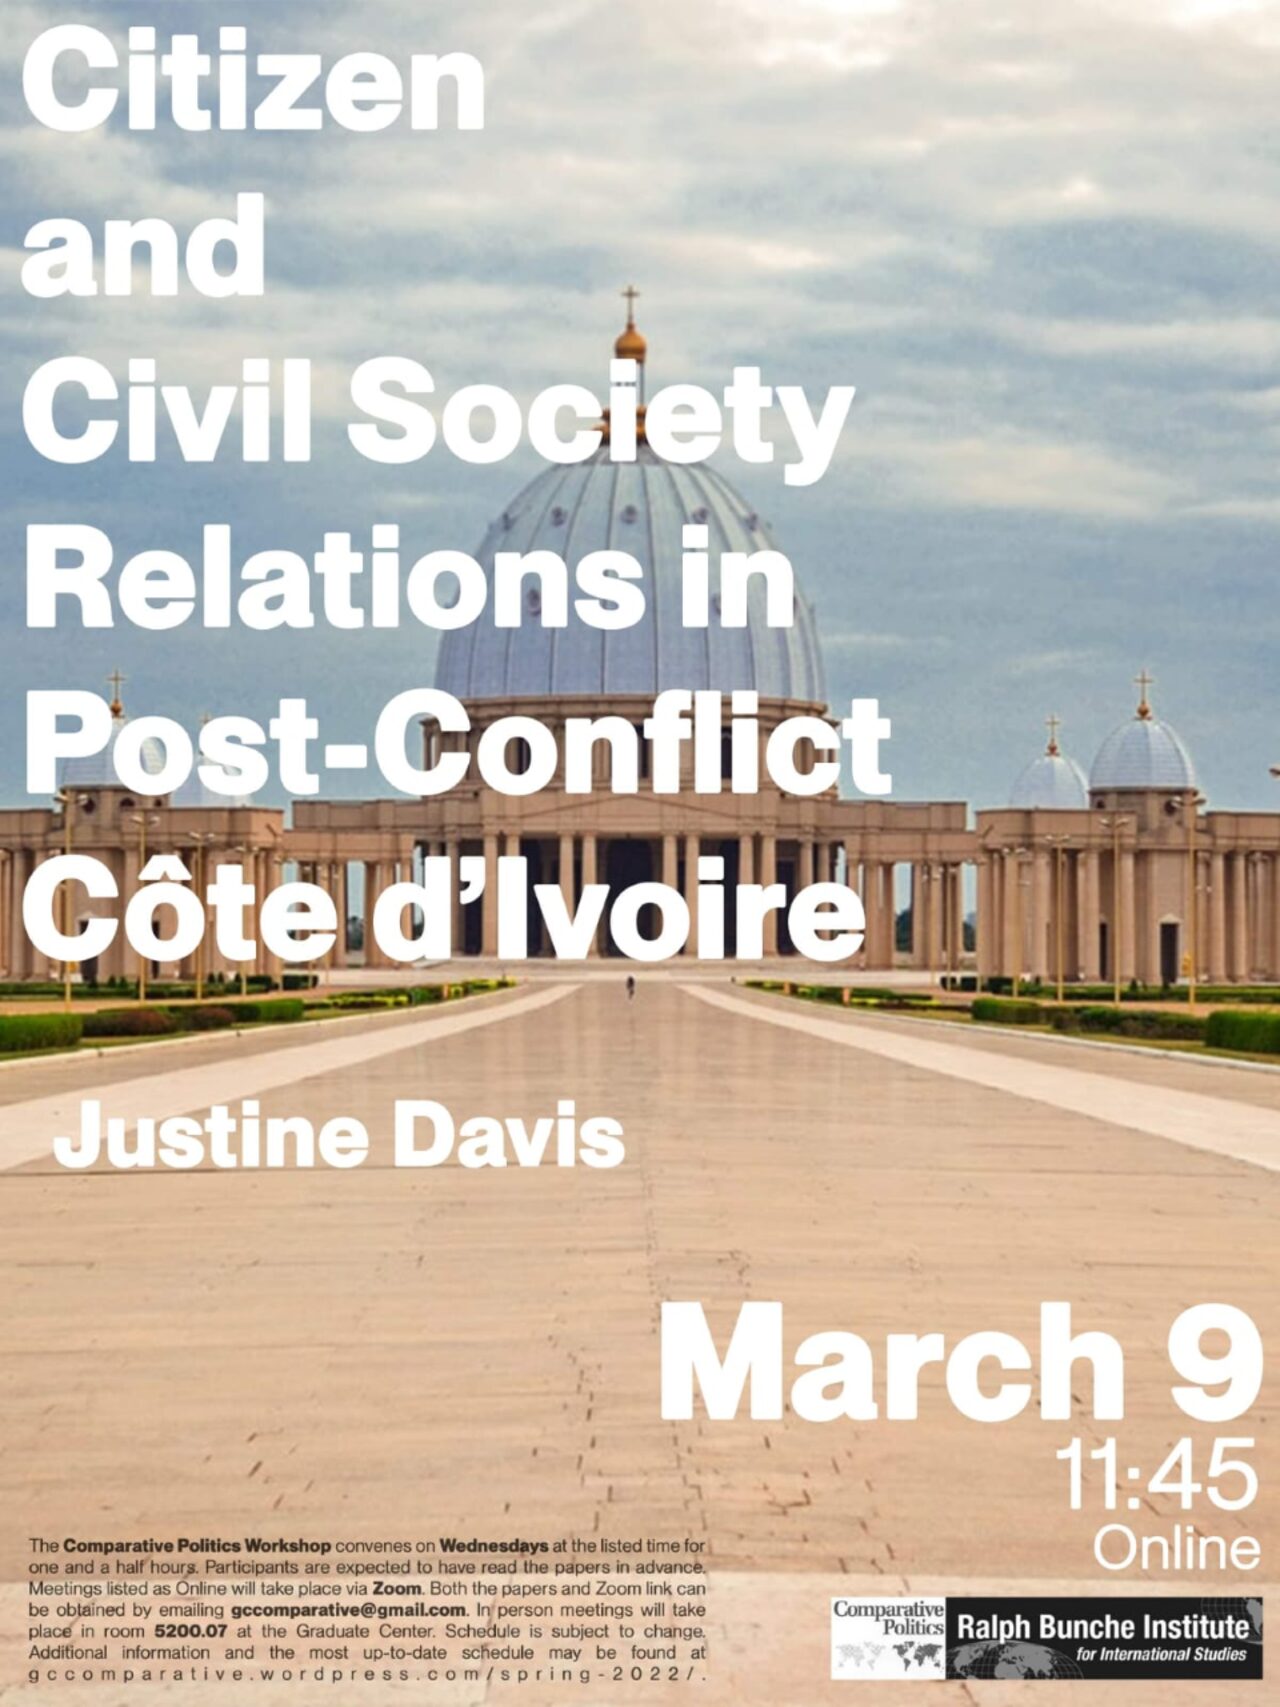 Comparative Politics Workshop: Justine Davis, "Citizen and Civil Society Relations in Post-Conflict Côte d’Ivoire," Wednesday, March 9, 11:45am-2:45pm